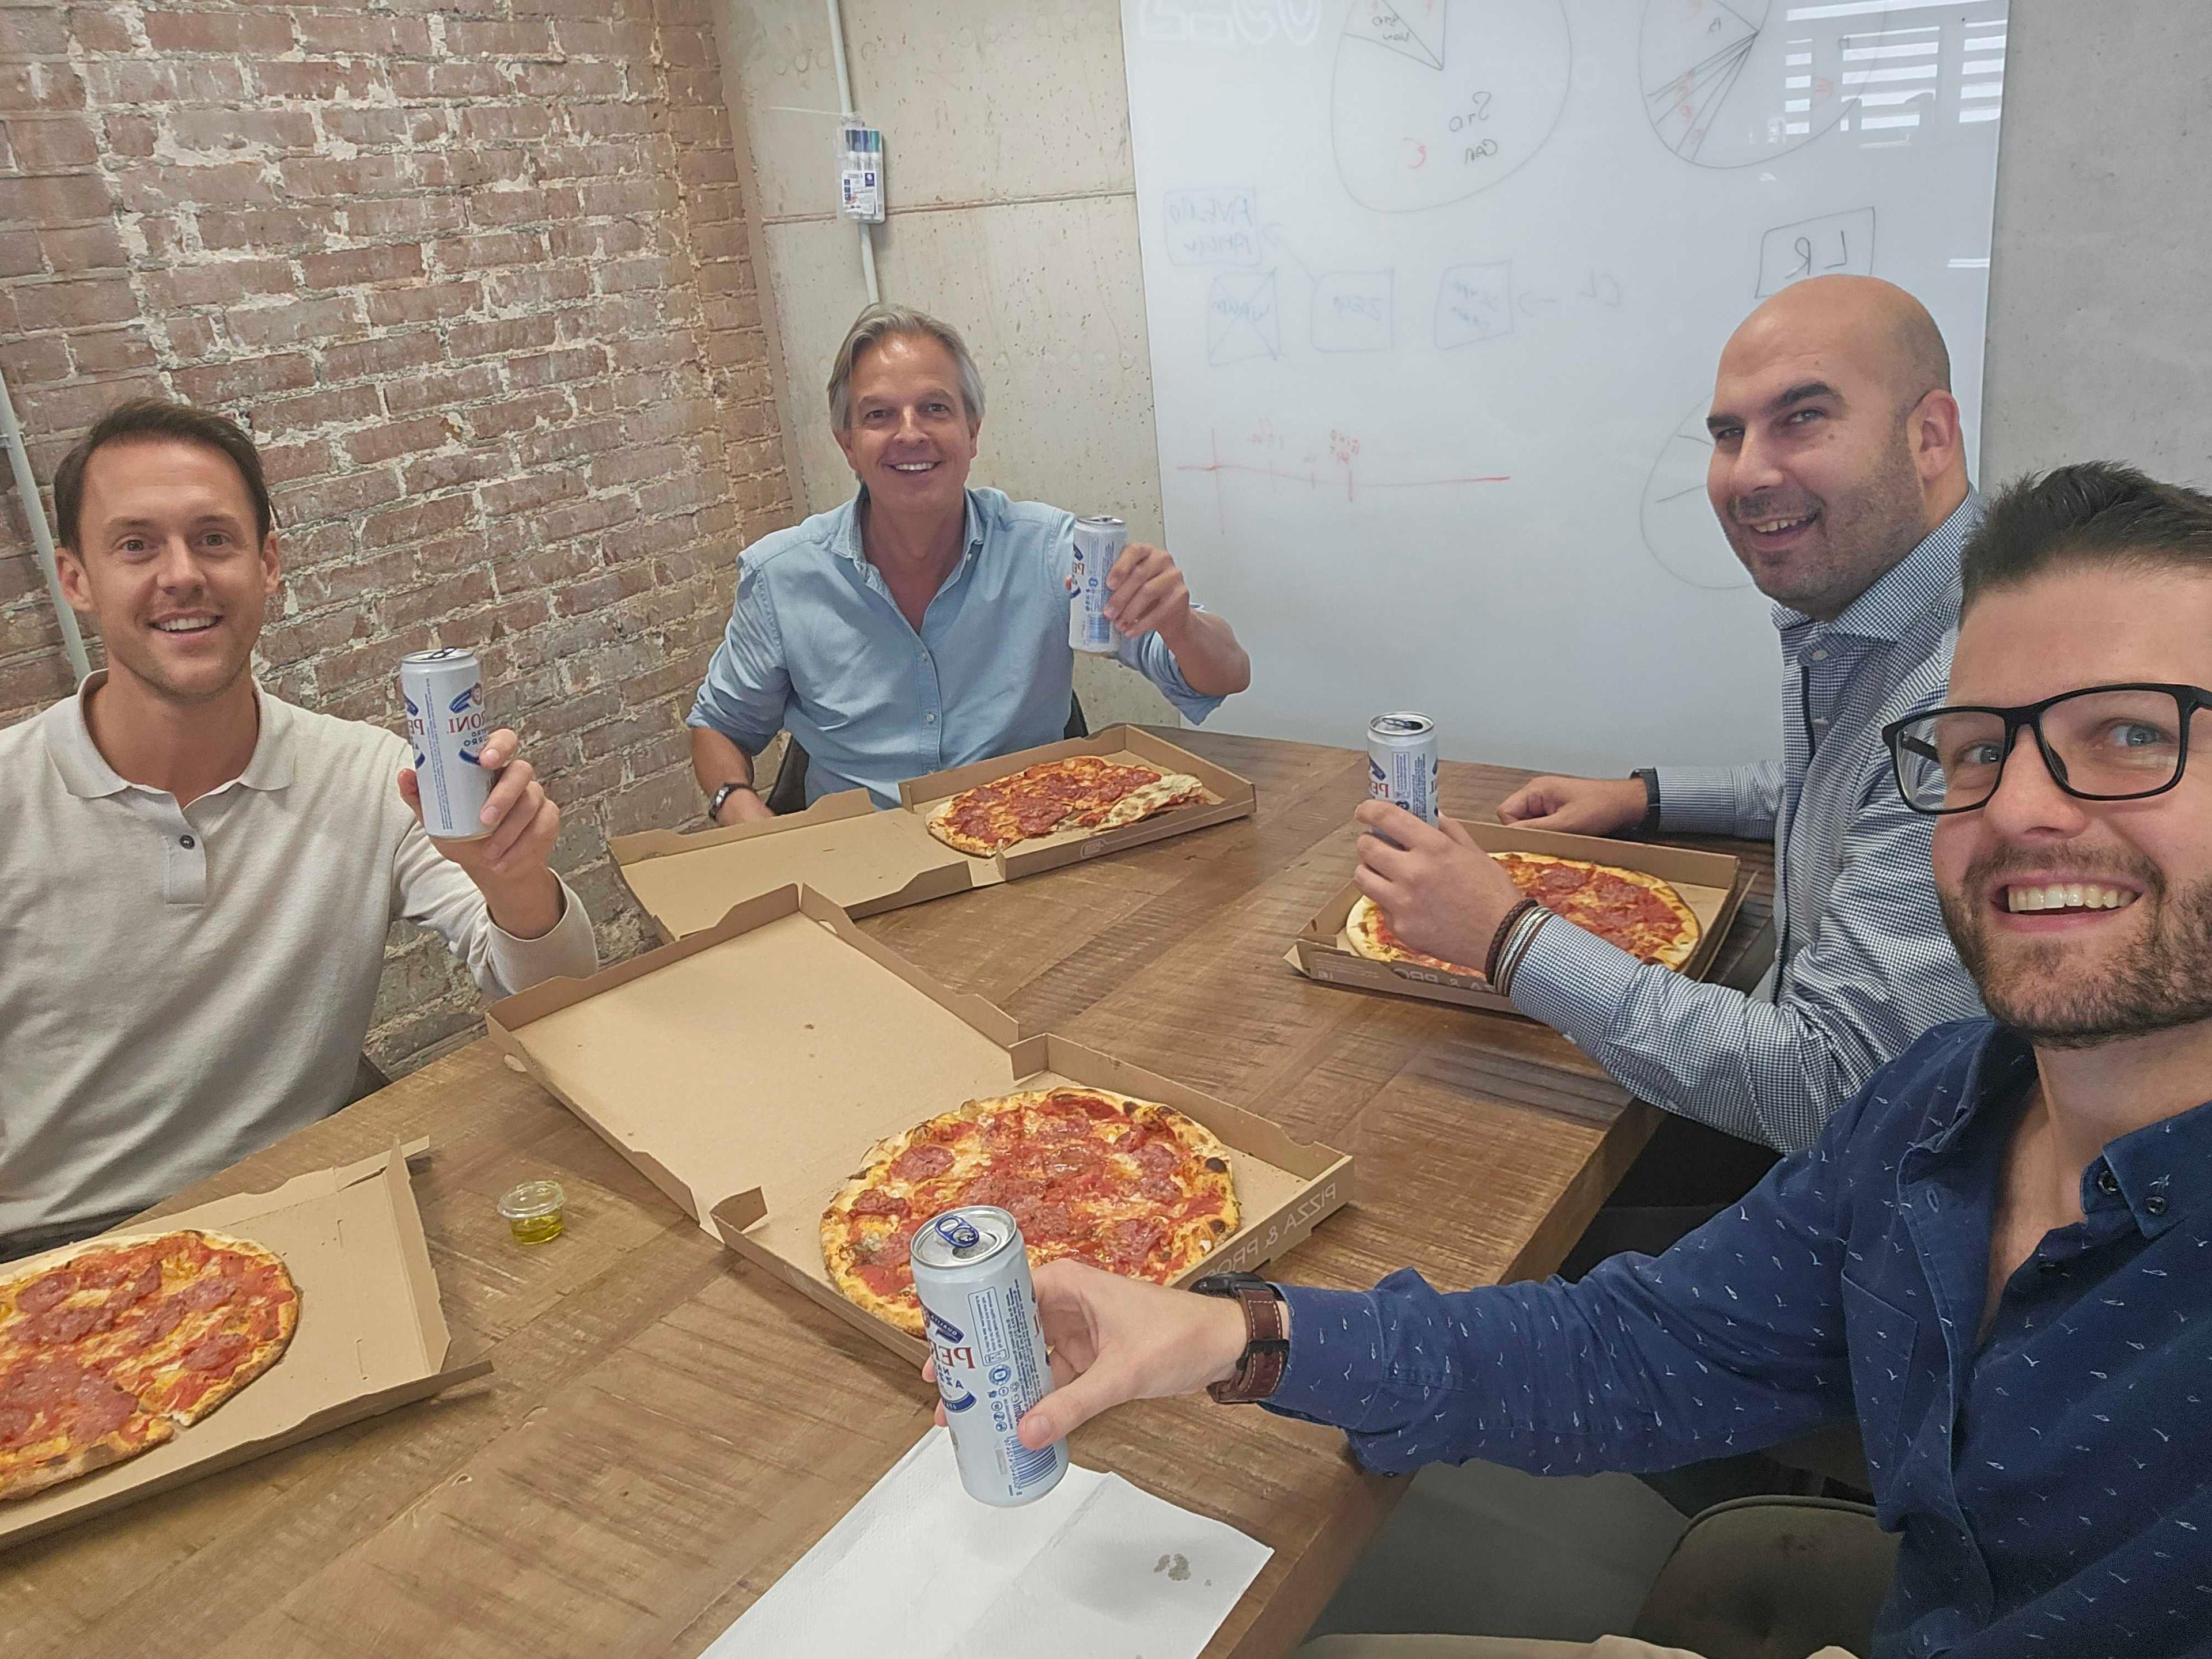 Colleagues eating pizza in a meeting room